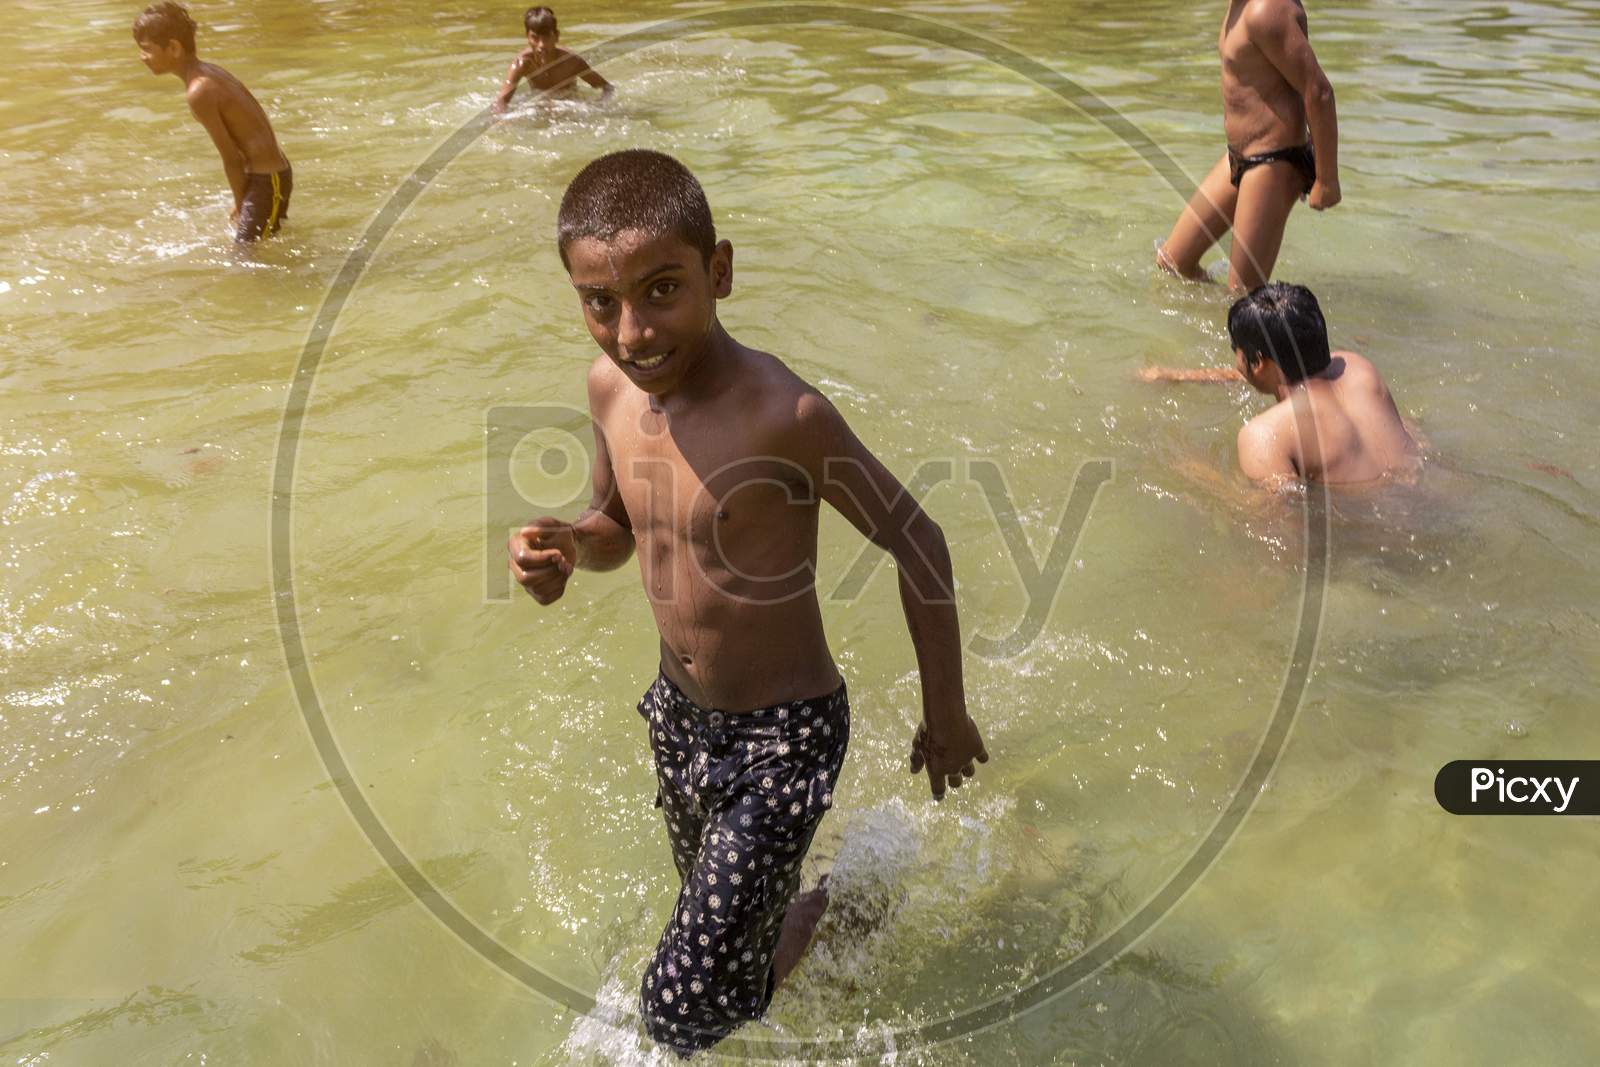 Delhi, New Delhi, India - May 26 2020: Happy Asian Kids Playing In A Lake Near India Gate In The Hot Summer. Cheerful And Carefree Children.